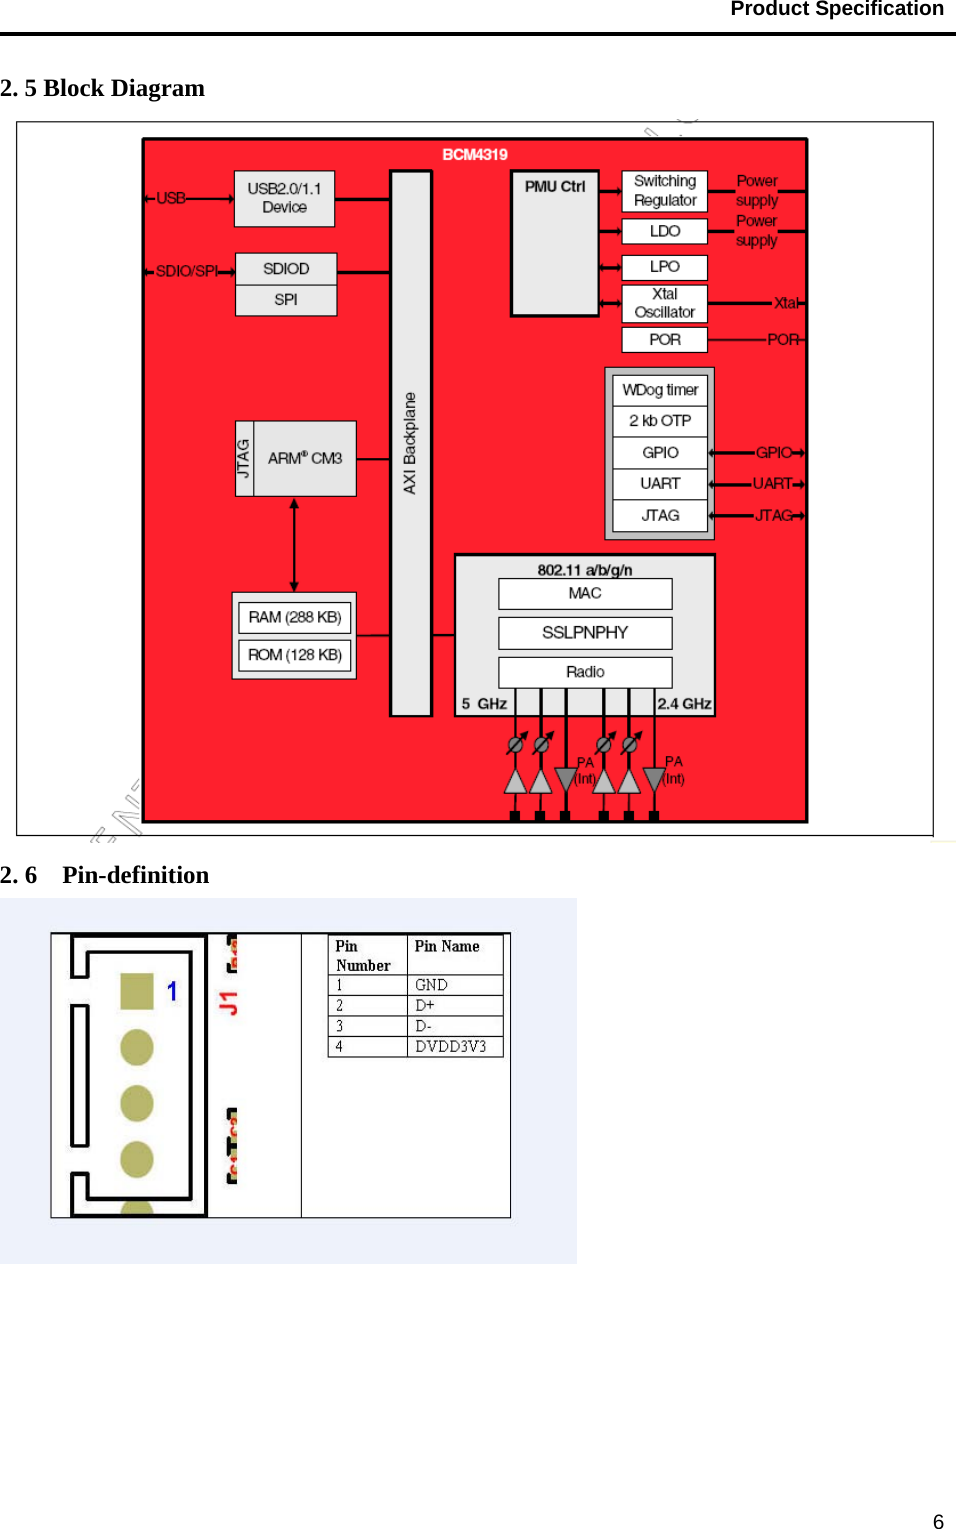                                           Product Specification                                               62. 5 Block Diagram  2. 6  Pin-definition  